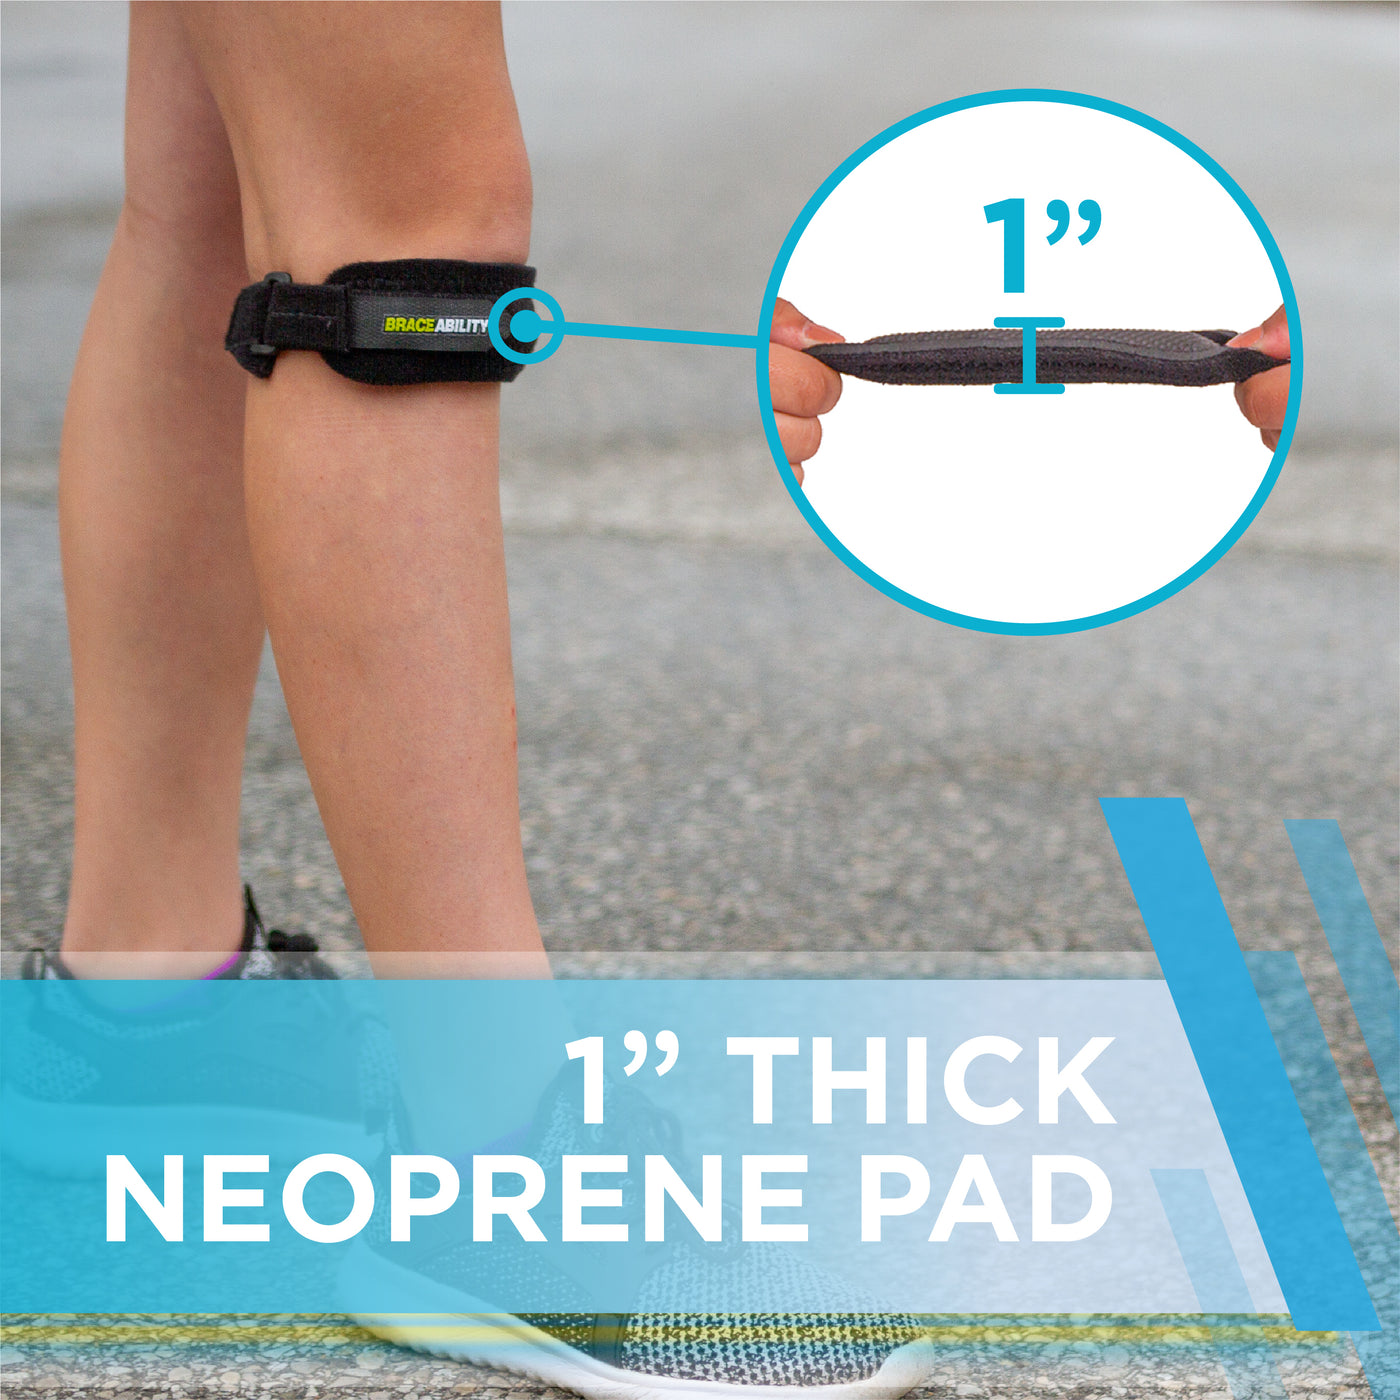 the one inch thick pad applies pressure to the bump on a kids knee to prevent knee pain